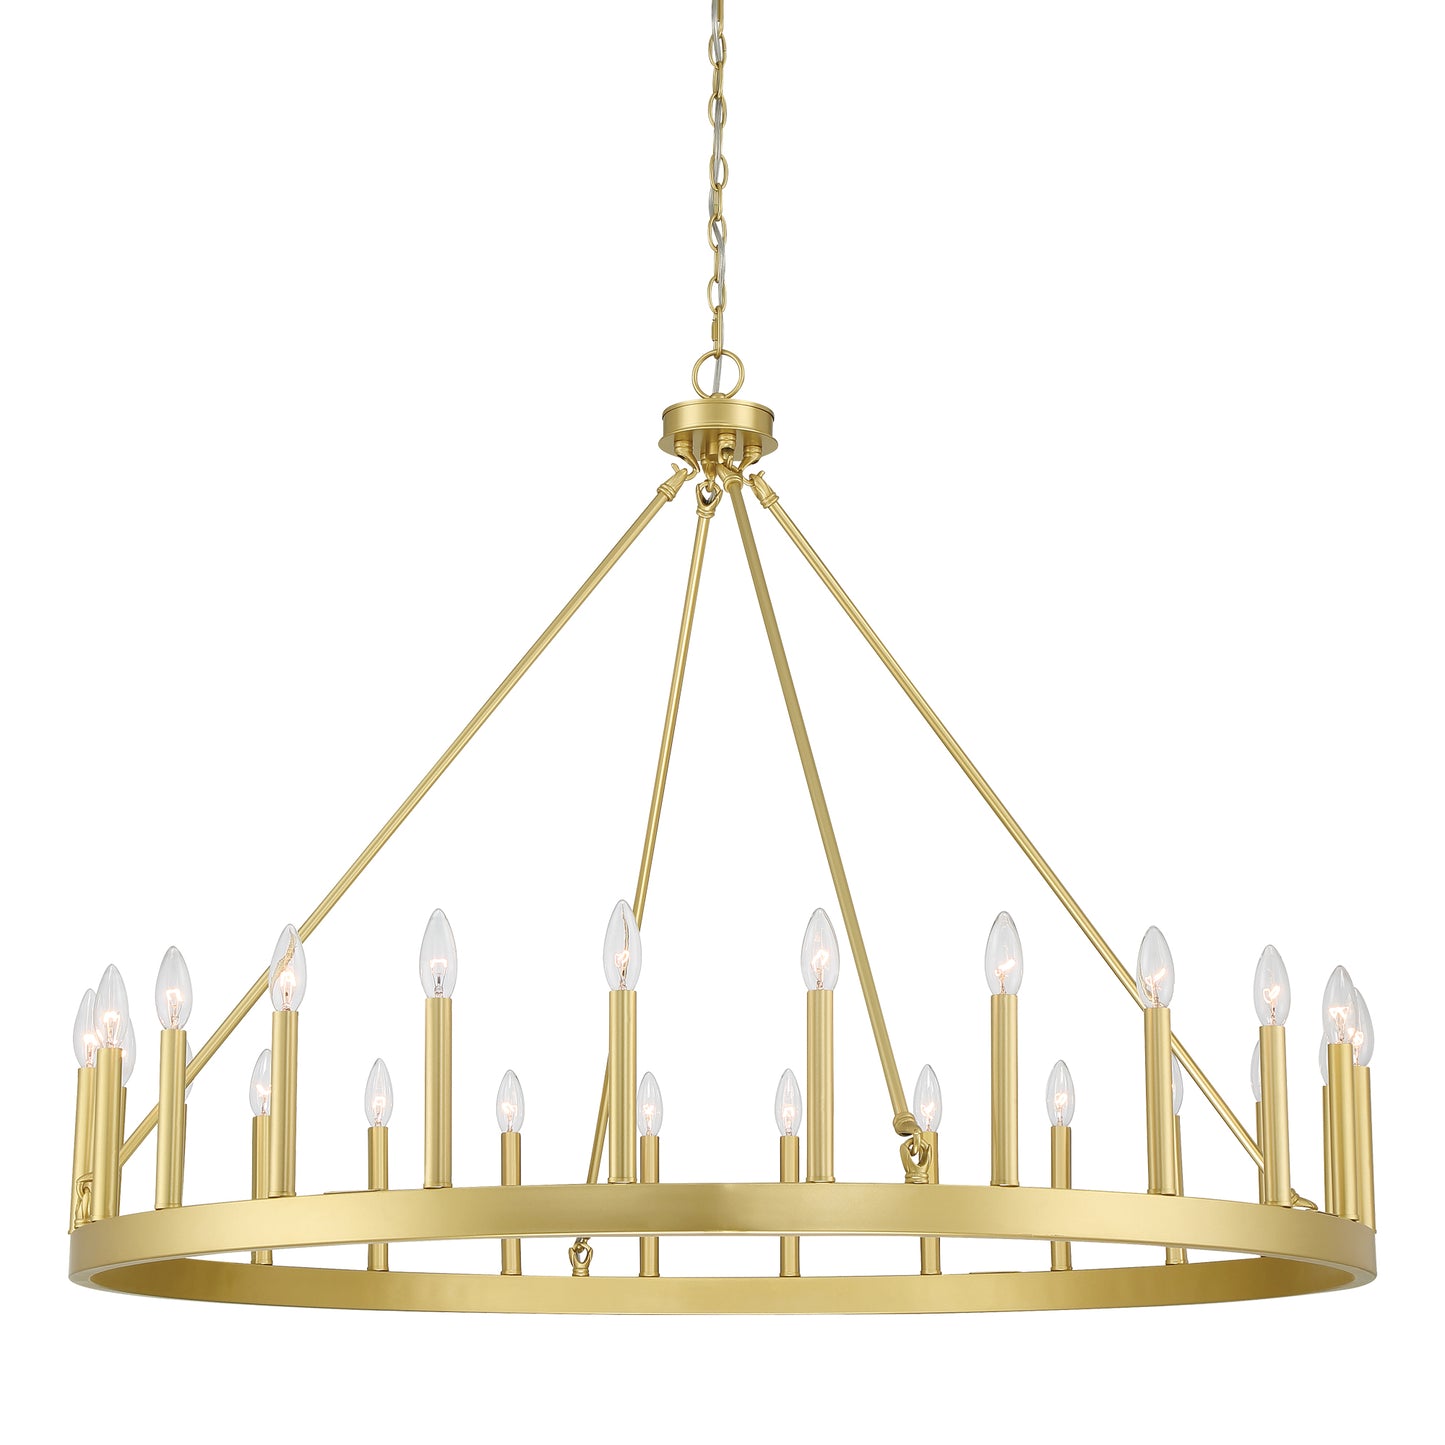 24-Light Candle Style Wagon Wheel Chandelier UL Listed